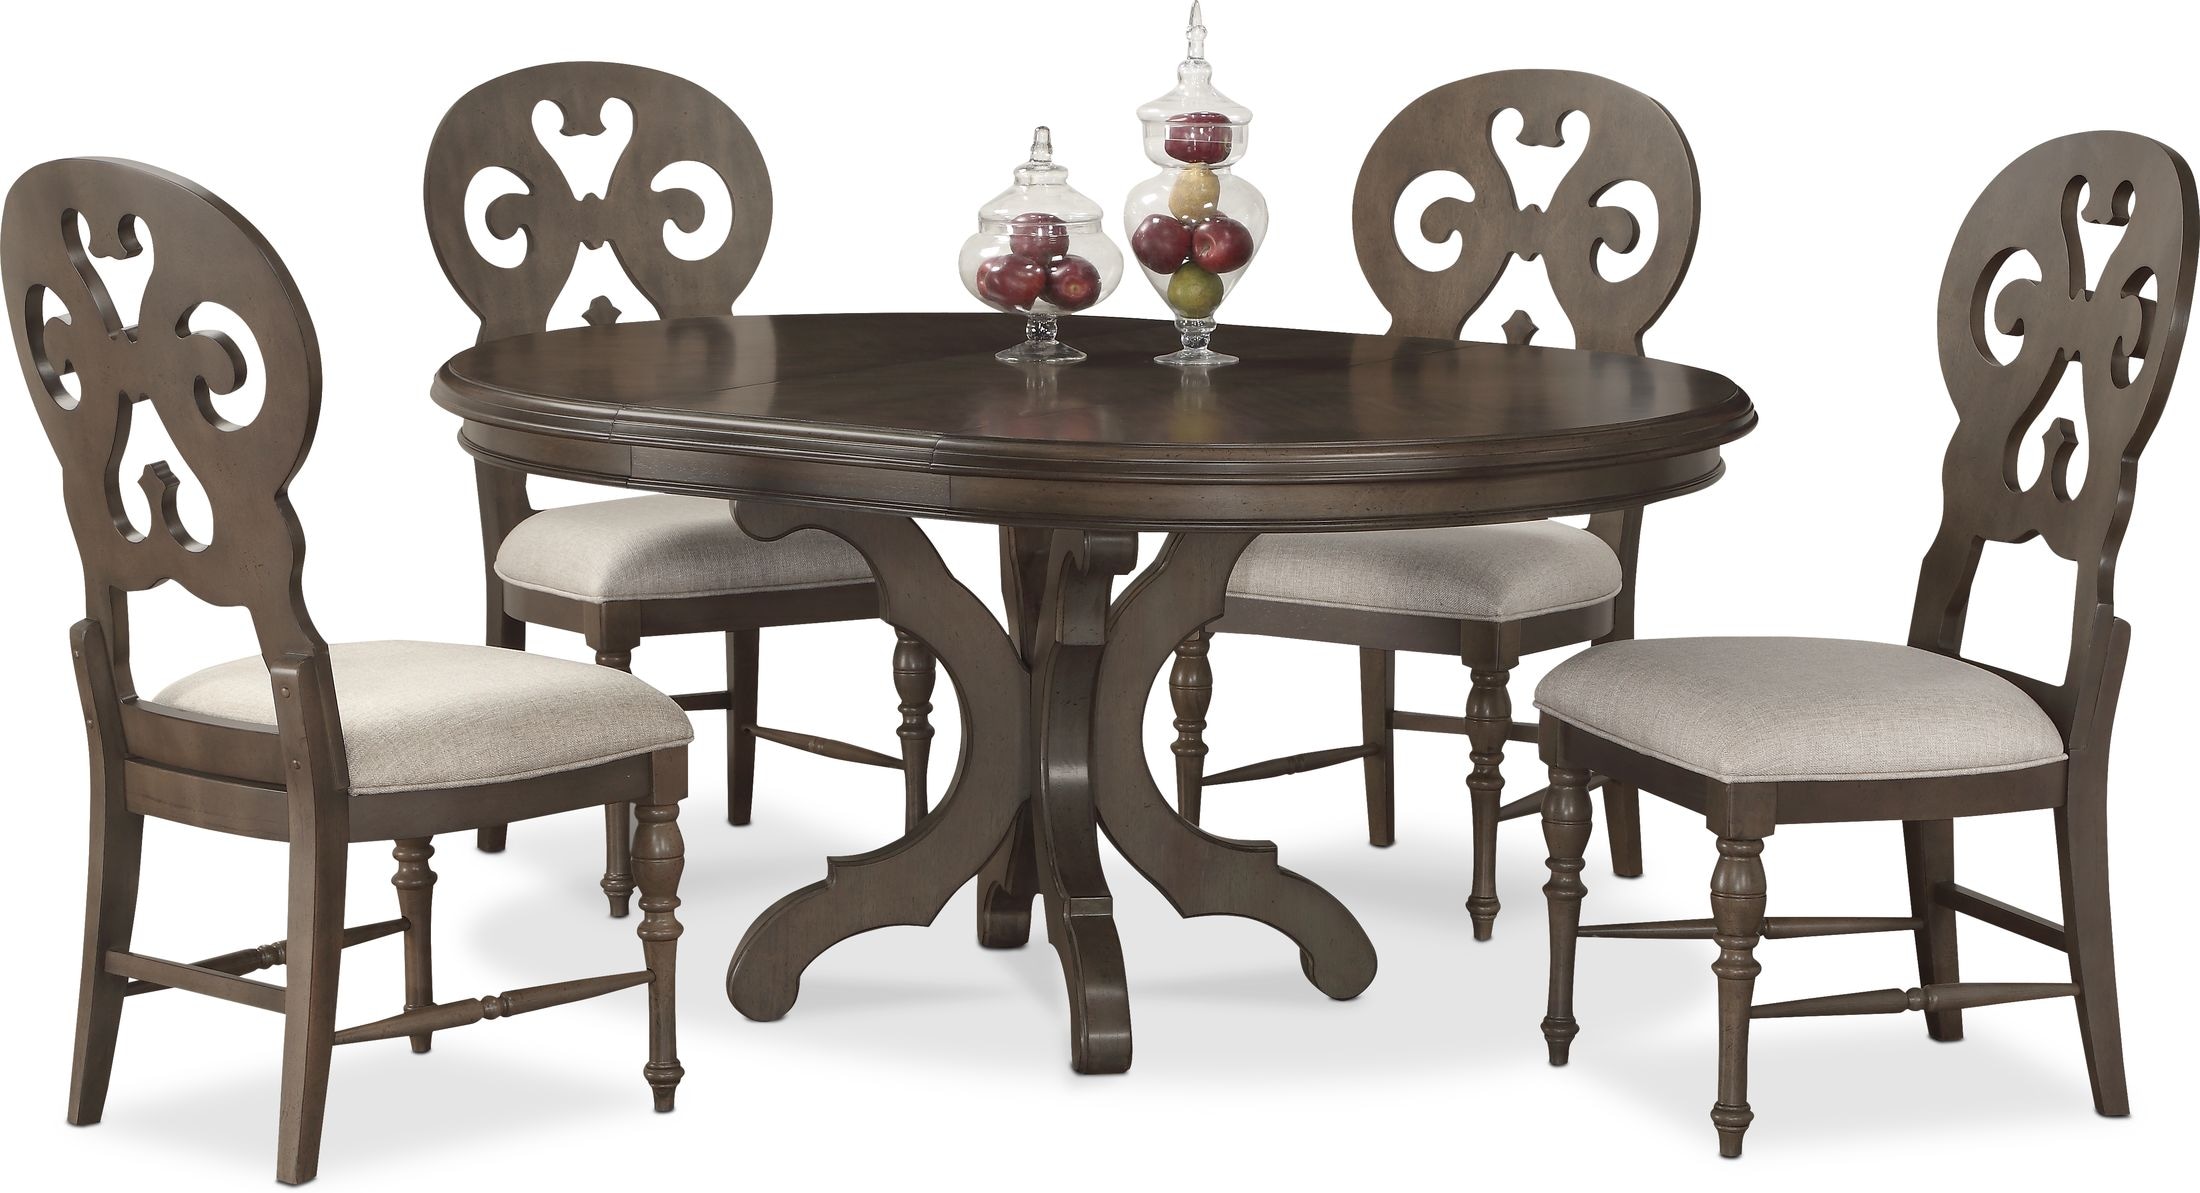 Value City Furniture Dining Chairs, Value City Dining Room Table